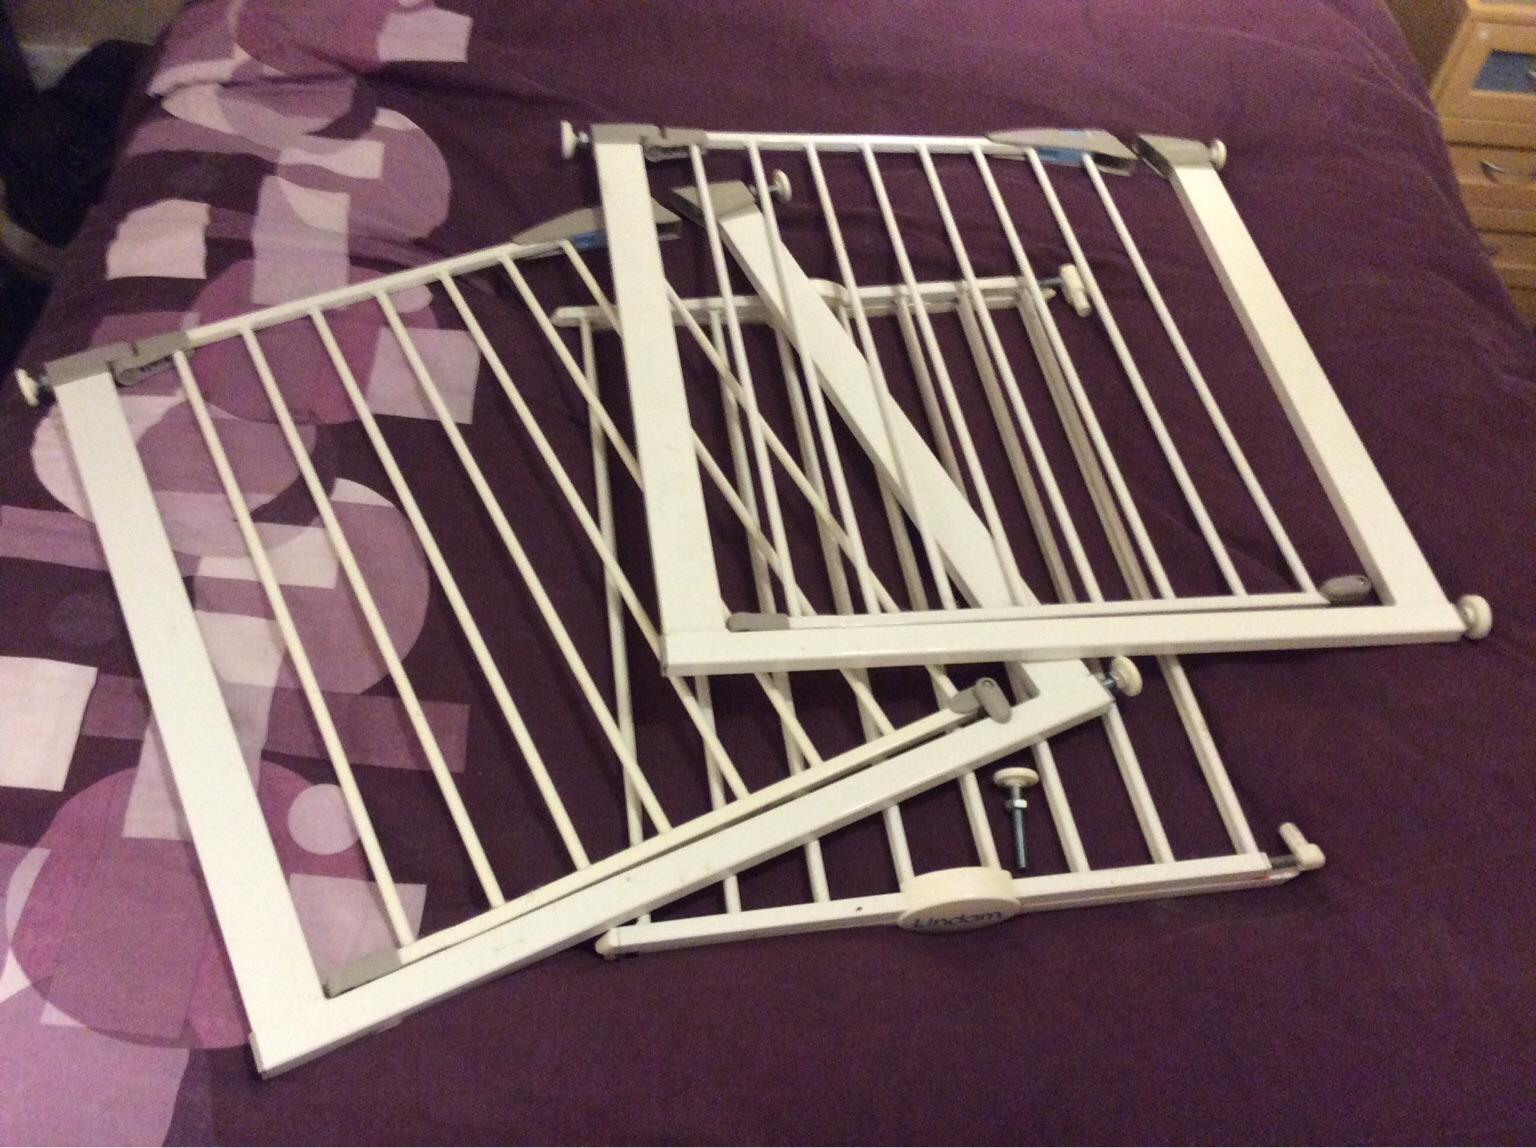 Baby Stair gates in NG5 Arnold for £15 